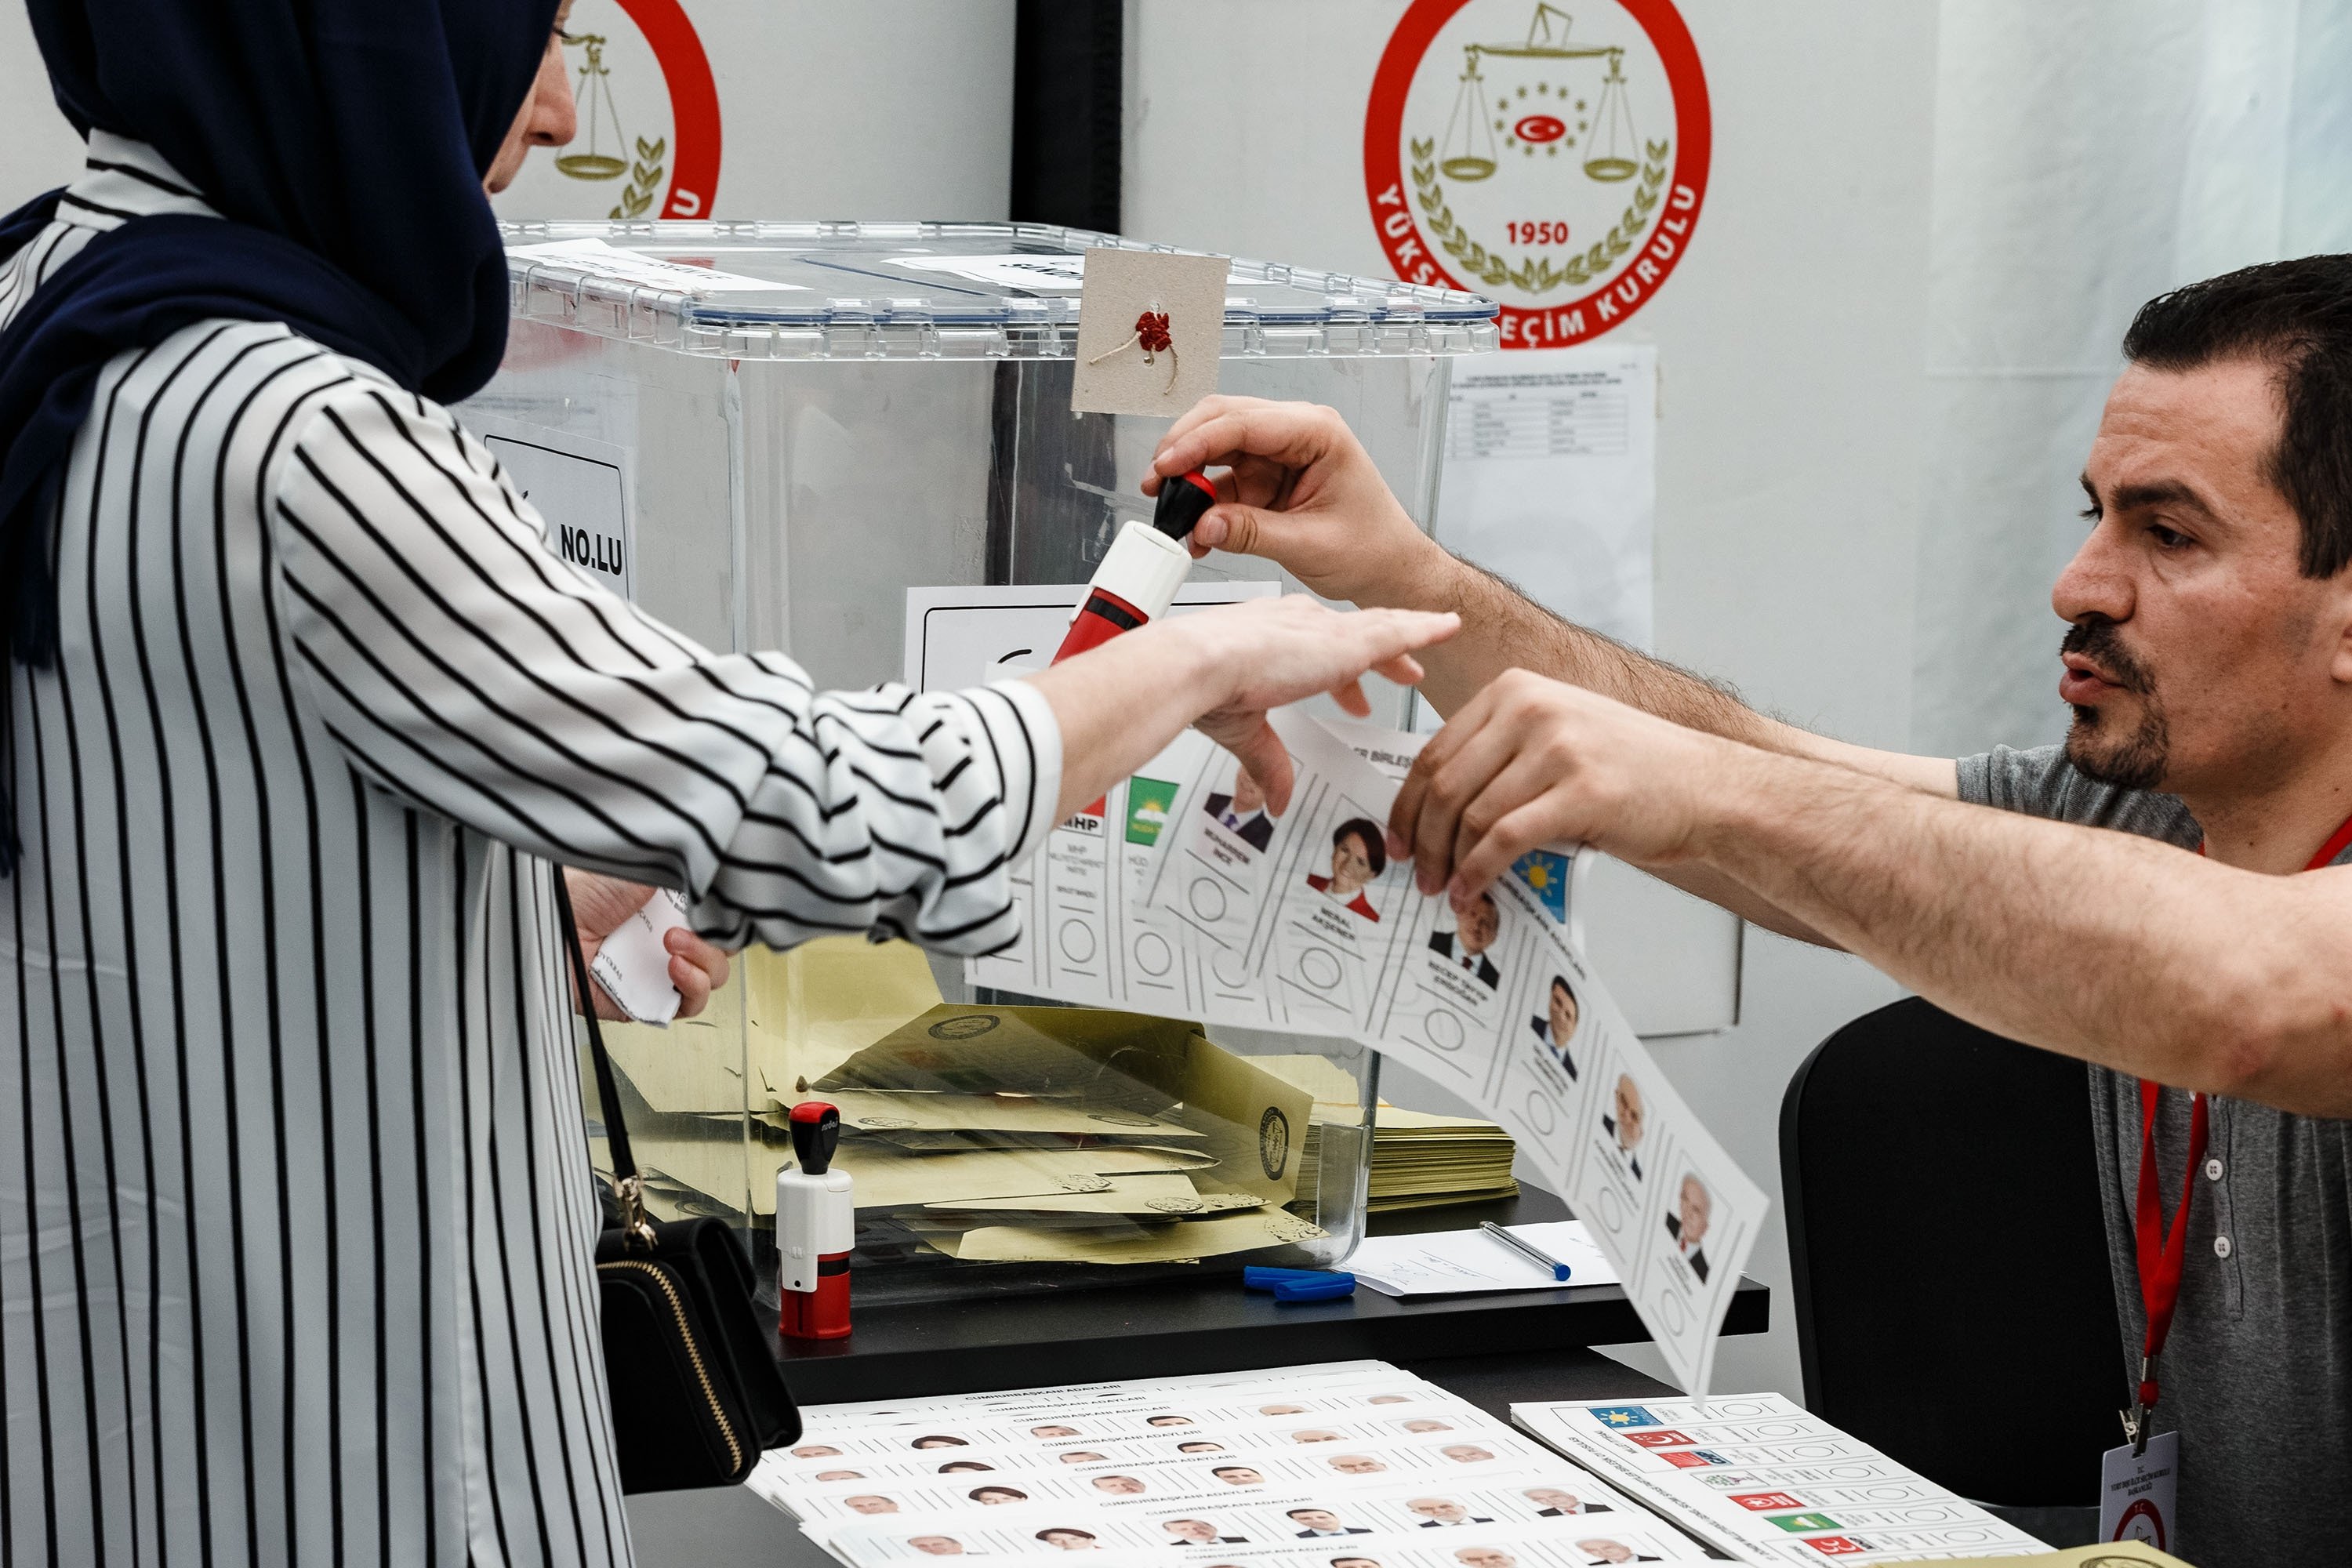 A member of the electoral commission gives a Turkish woman ballot paper and the stamp to mark her candidates, Hamburg, June 7, 2018. (Getty Images)